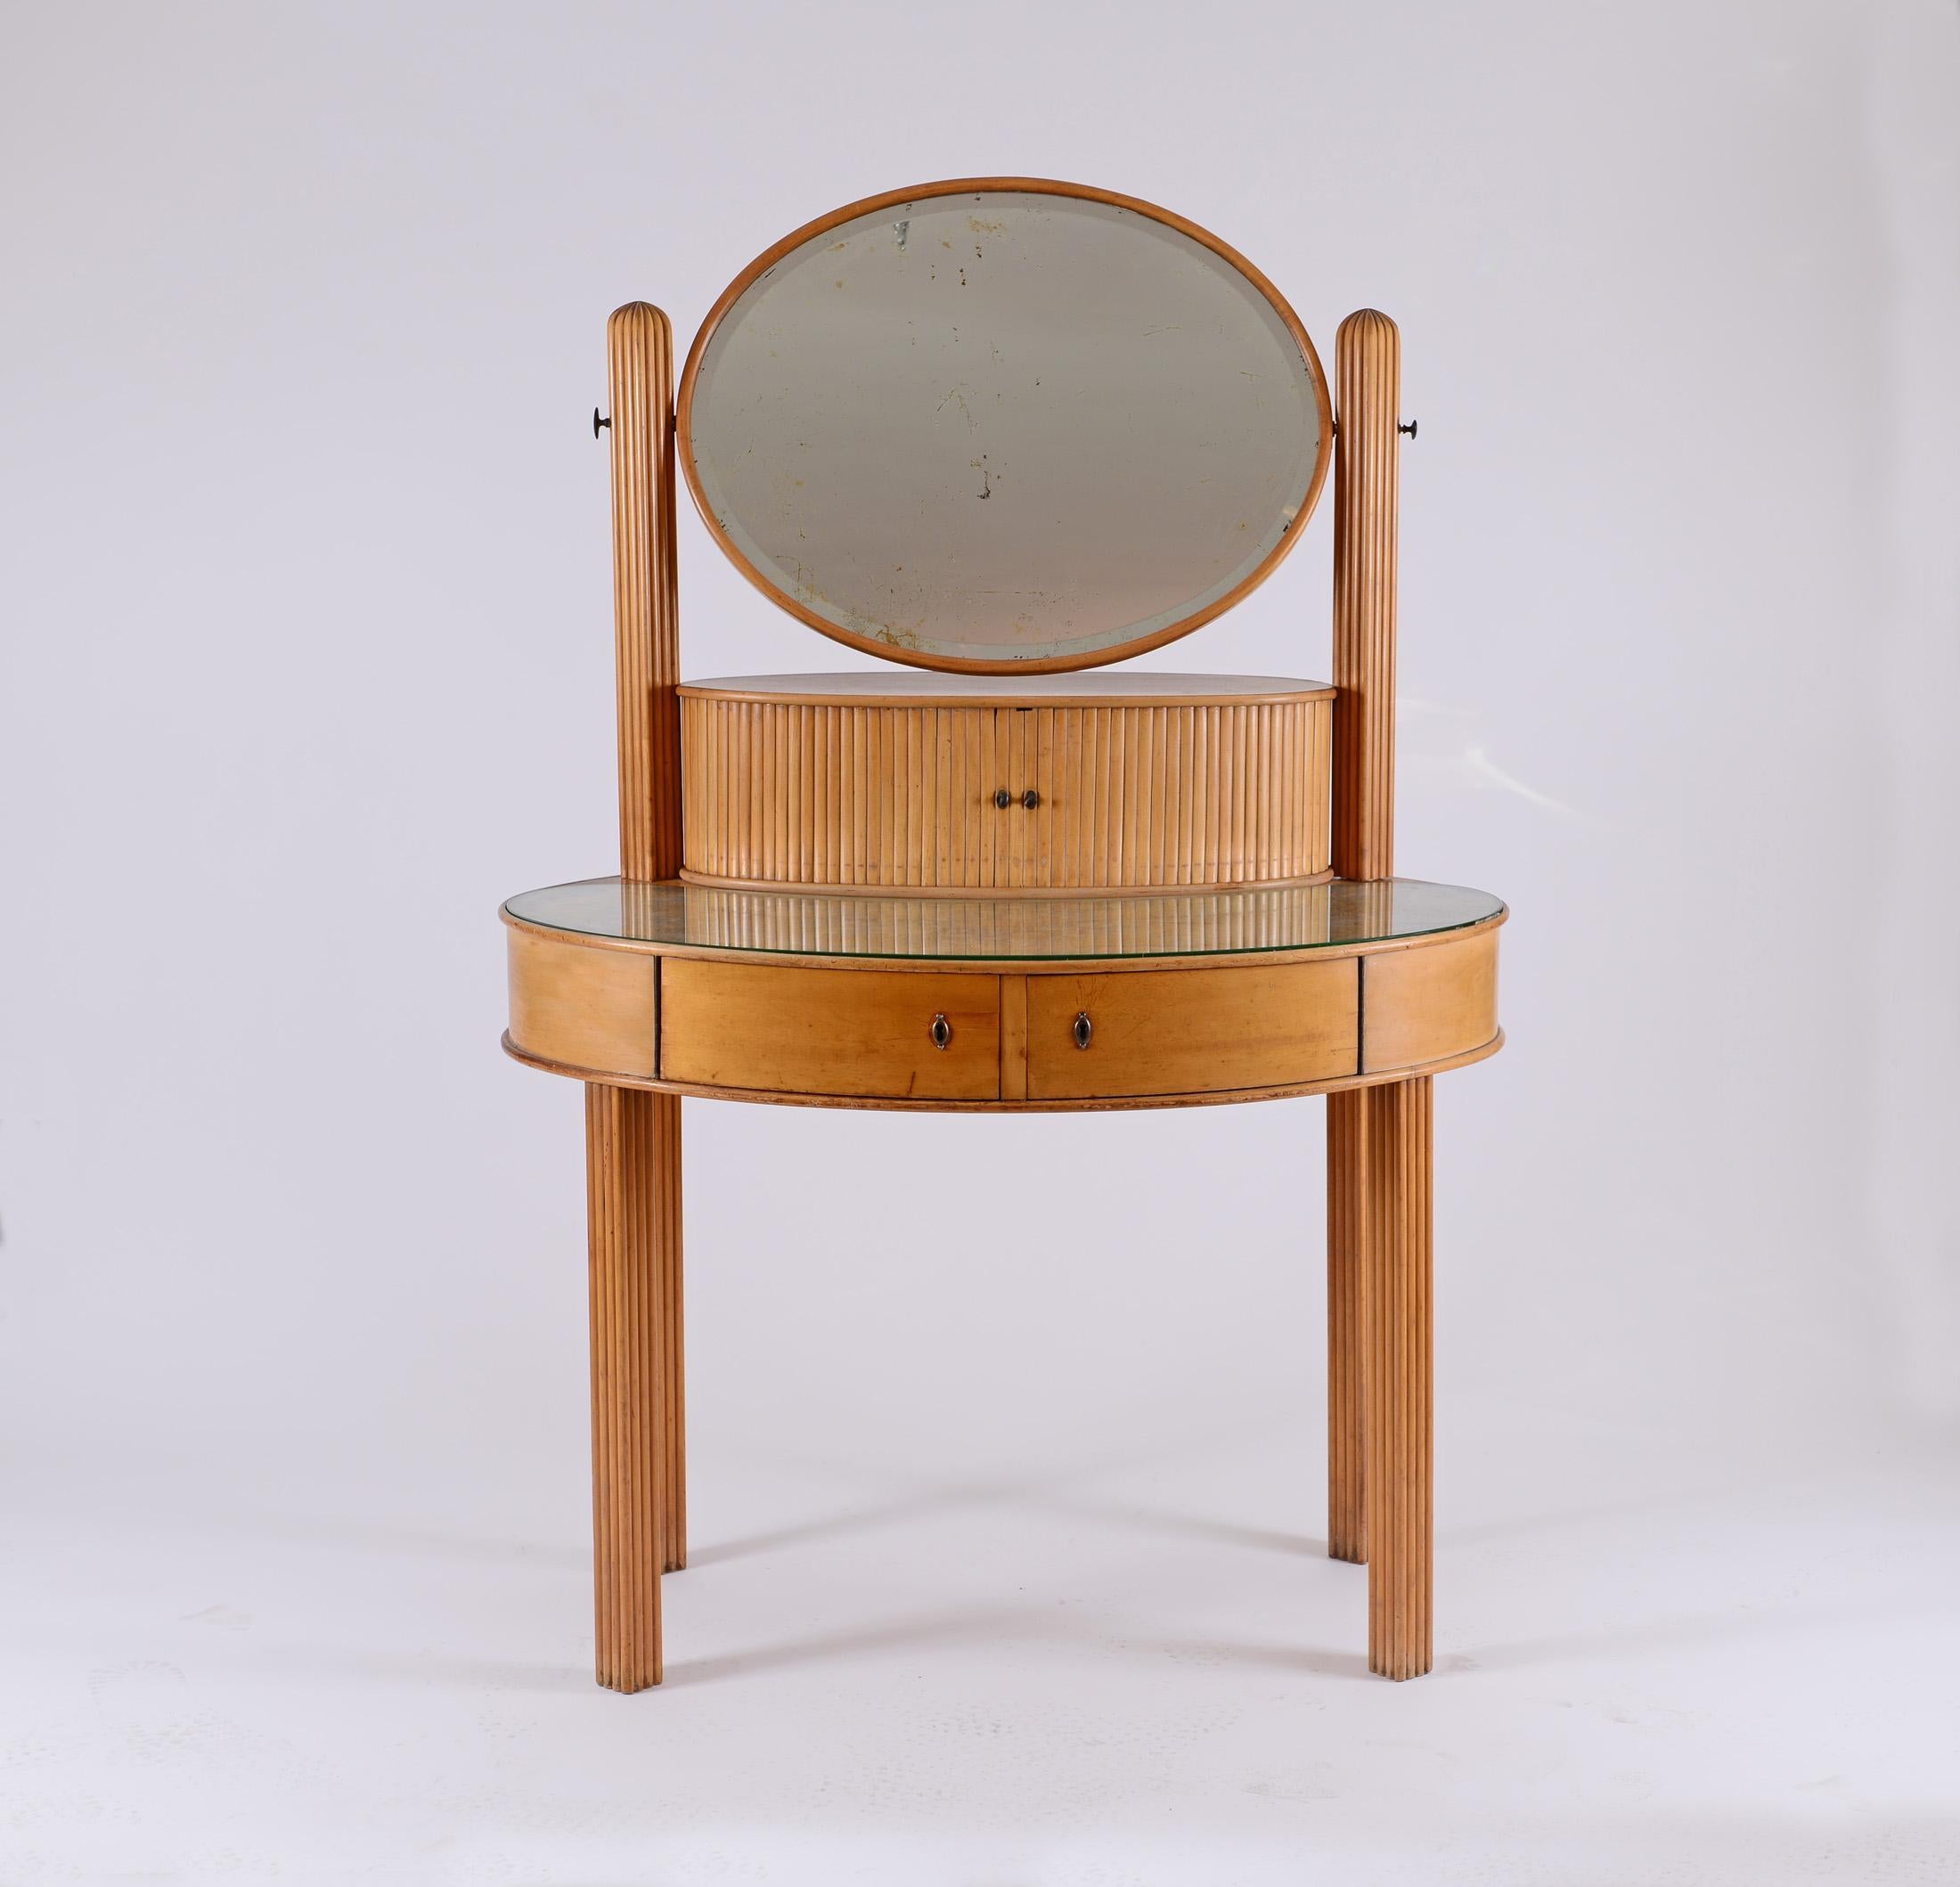 An extremely rare dressing table designed by Otto Prutscher and manufactured at Gebrueder Thonet in 1908. Literature: Innendekoration 1917 as well as a very similar model for the Villa in Jaegerndorf
The fitting chair is also available.

